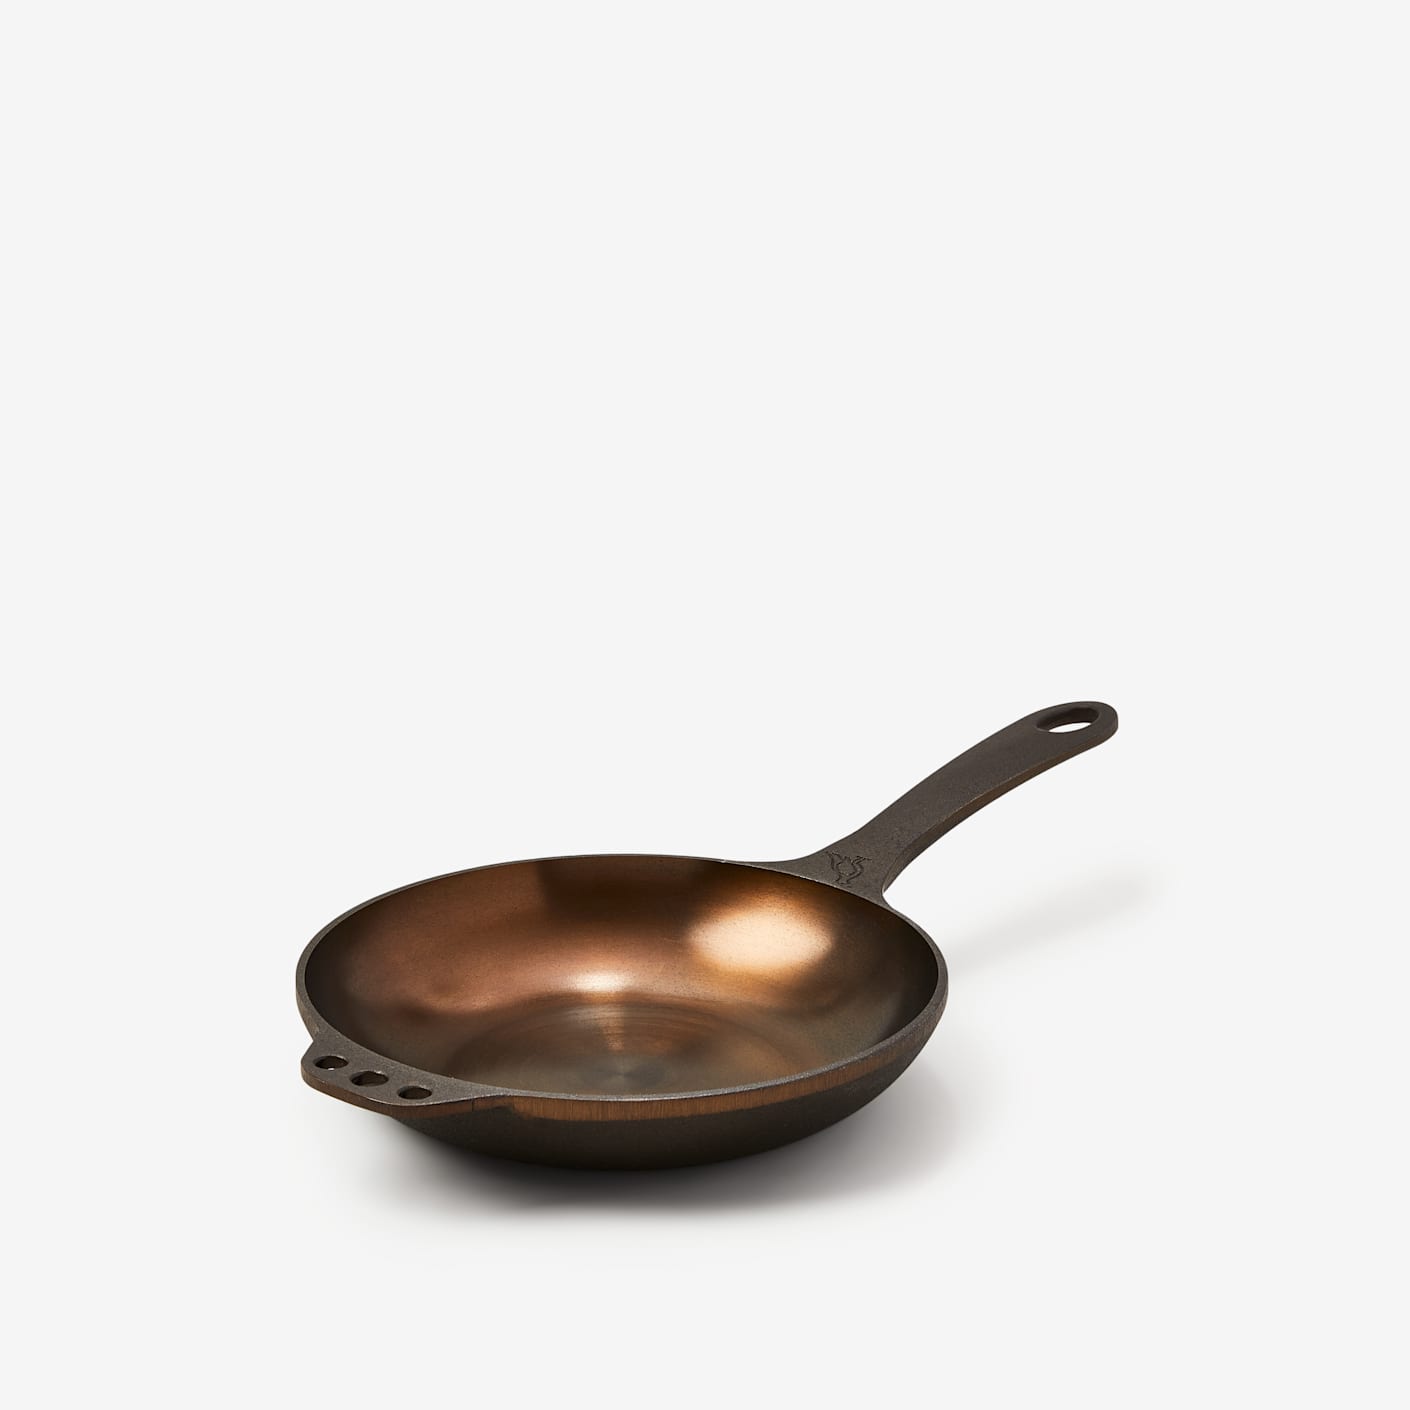 https://dam.bespokepost.com/image/upload/c_limit,dpr_auto,f_auto,q_auto,w_1410/v1/Storefront/2023/02-february/in-house/smithey-ironware-no.-8-chef-skillet_1